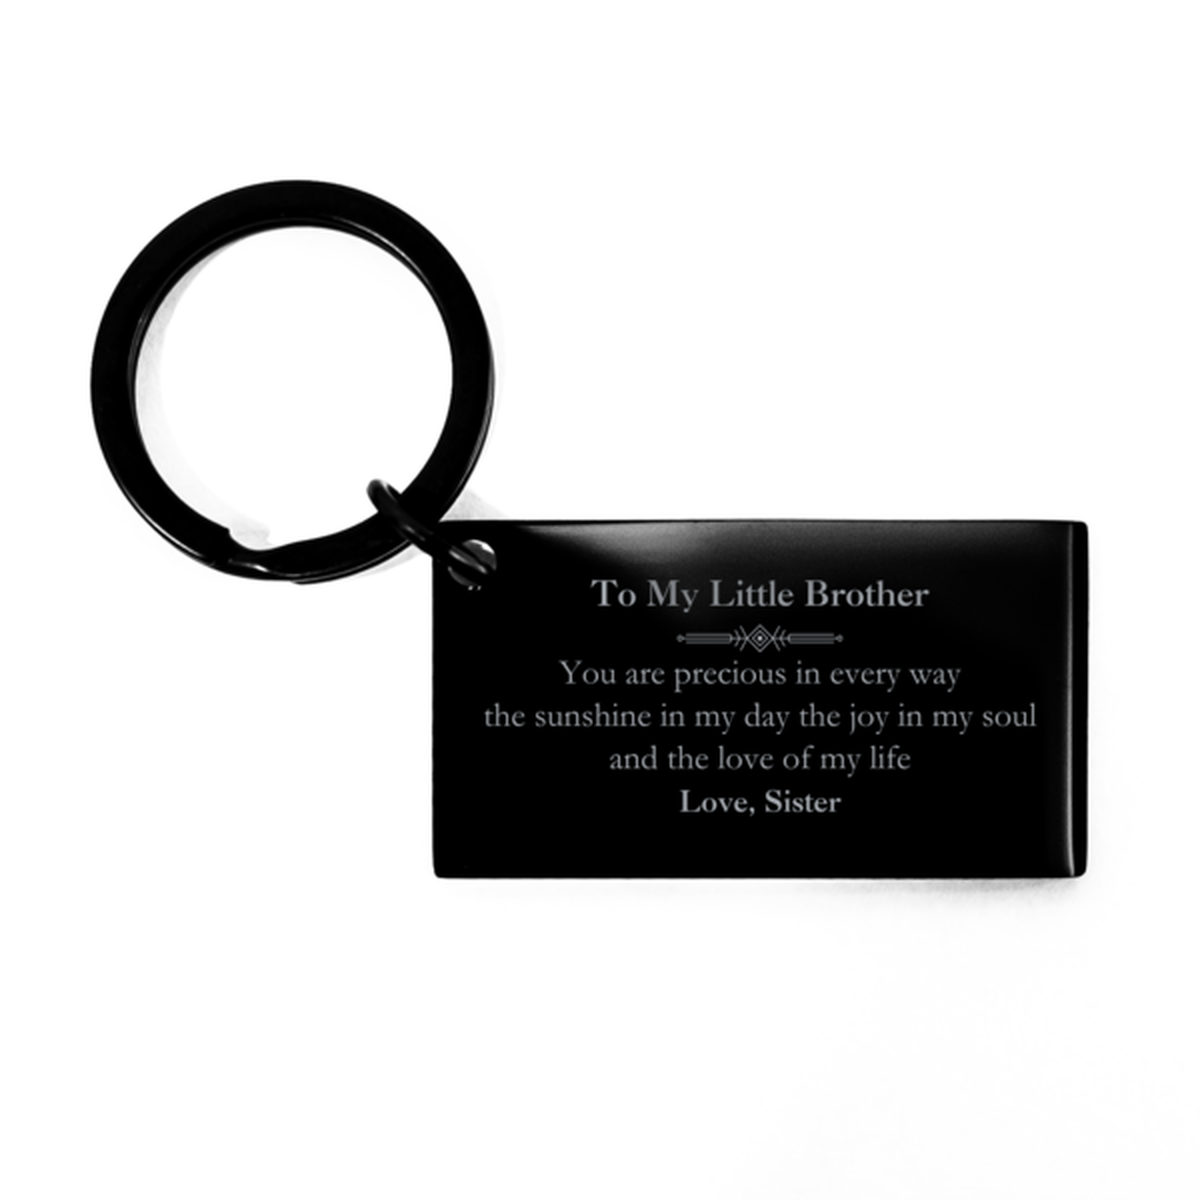 Graduation Gifts for Little Brother Keychain Present from Sister, Christmas Little Brother Birthday Gifts Little Brother You are precious in every way the sunshine in my day. Love, Sister